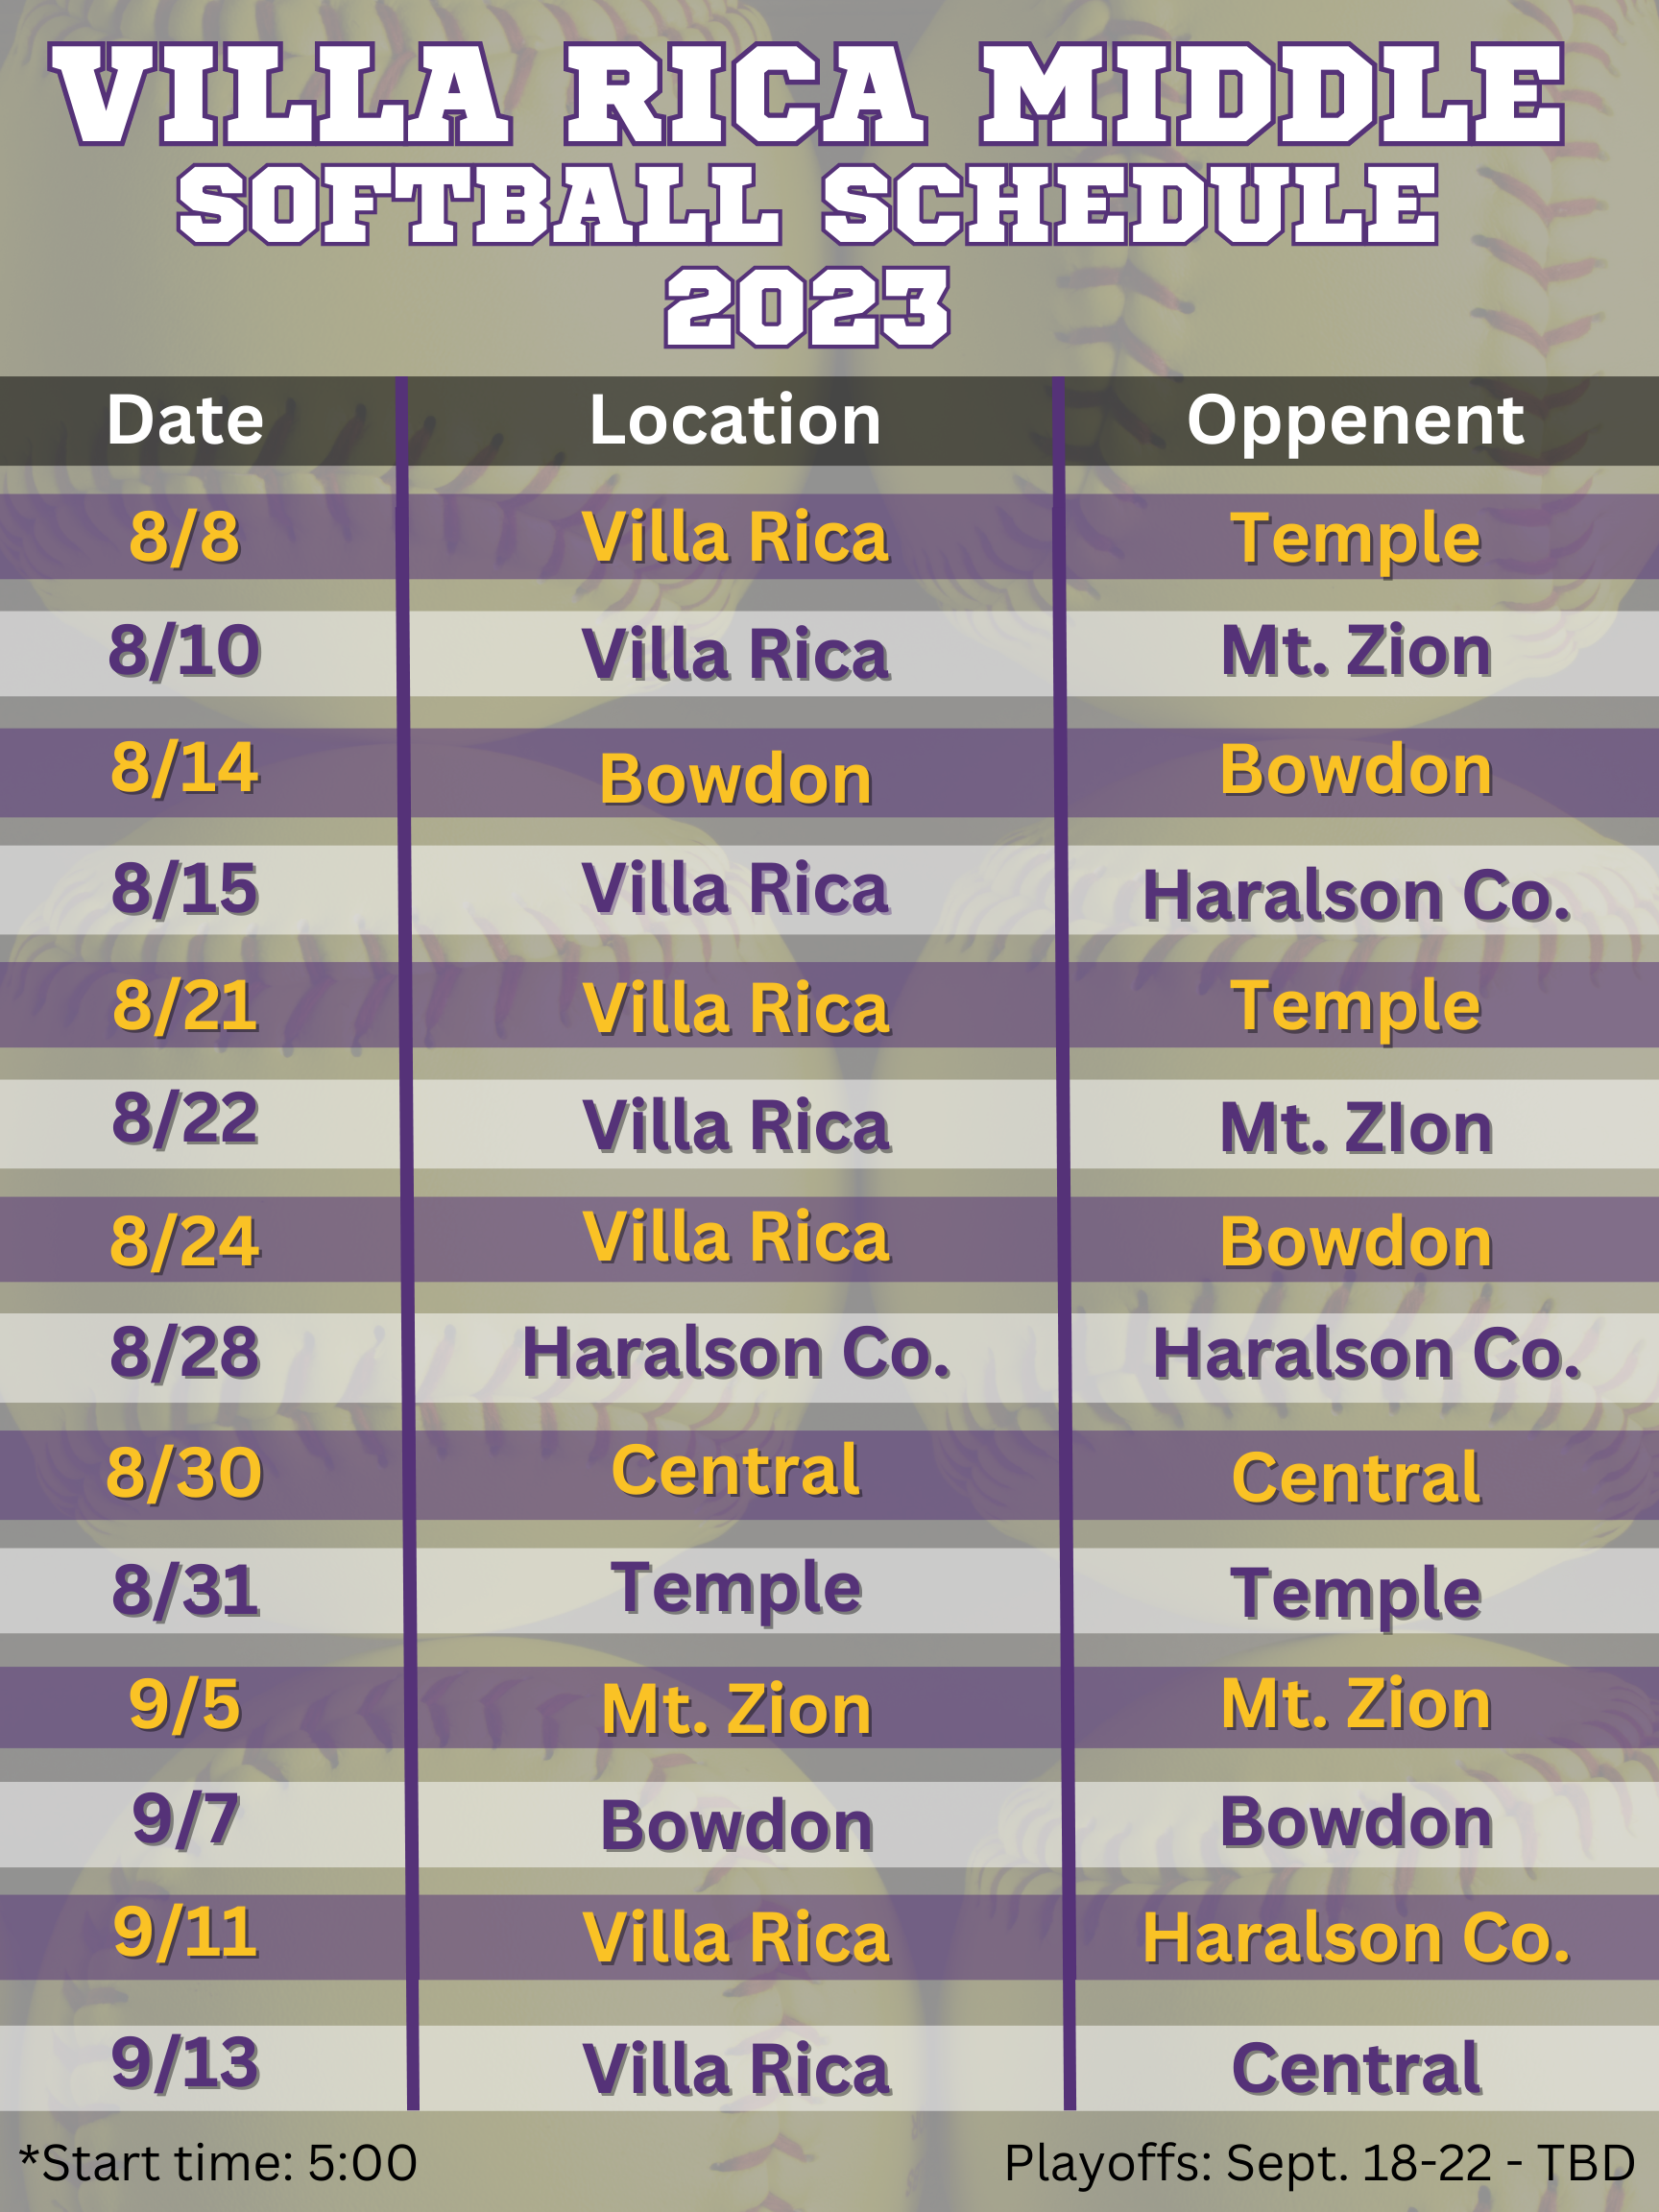 May be an image of text that says 'VILLA RICA MIDDLE SOFTBALL SCHEDULE 2023 Location Date 8/8 Villa Rica Villa Rica 8/10 8/14 8/15 Oppenent Temple Mt. Zion Bowdon Villa Rica Bowdon 8/21 8/22 Villa Rica Haralson Co. Temple Mt. Zlon Villa Rica Villa Rica 8/24 8/28 Haralson Co. 8/30 Bowdon Central Haralson Co. 8/31 9/5 Temple Mt. Zion Central Temple Mt. Zion 9/7 9/11 Bowdon Villa Rica Bowdon 9/13 *Start time: 5:00 Villa Rica Haralson Co. Central Playoffs: Sept. 18-22-T